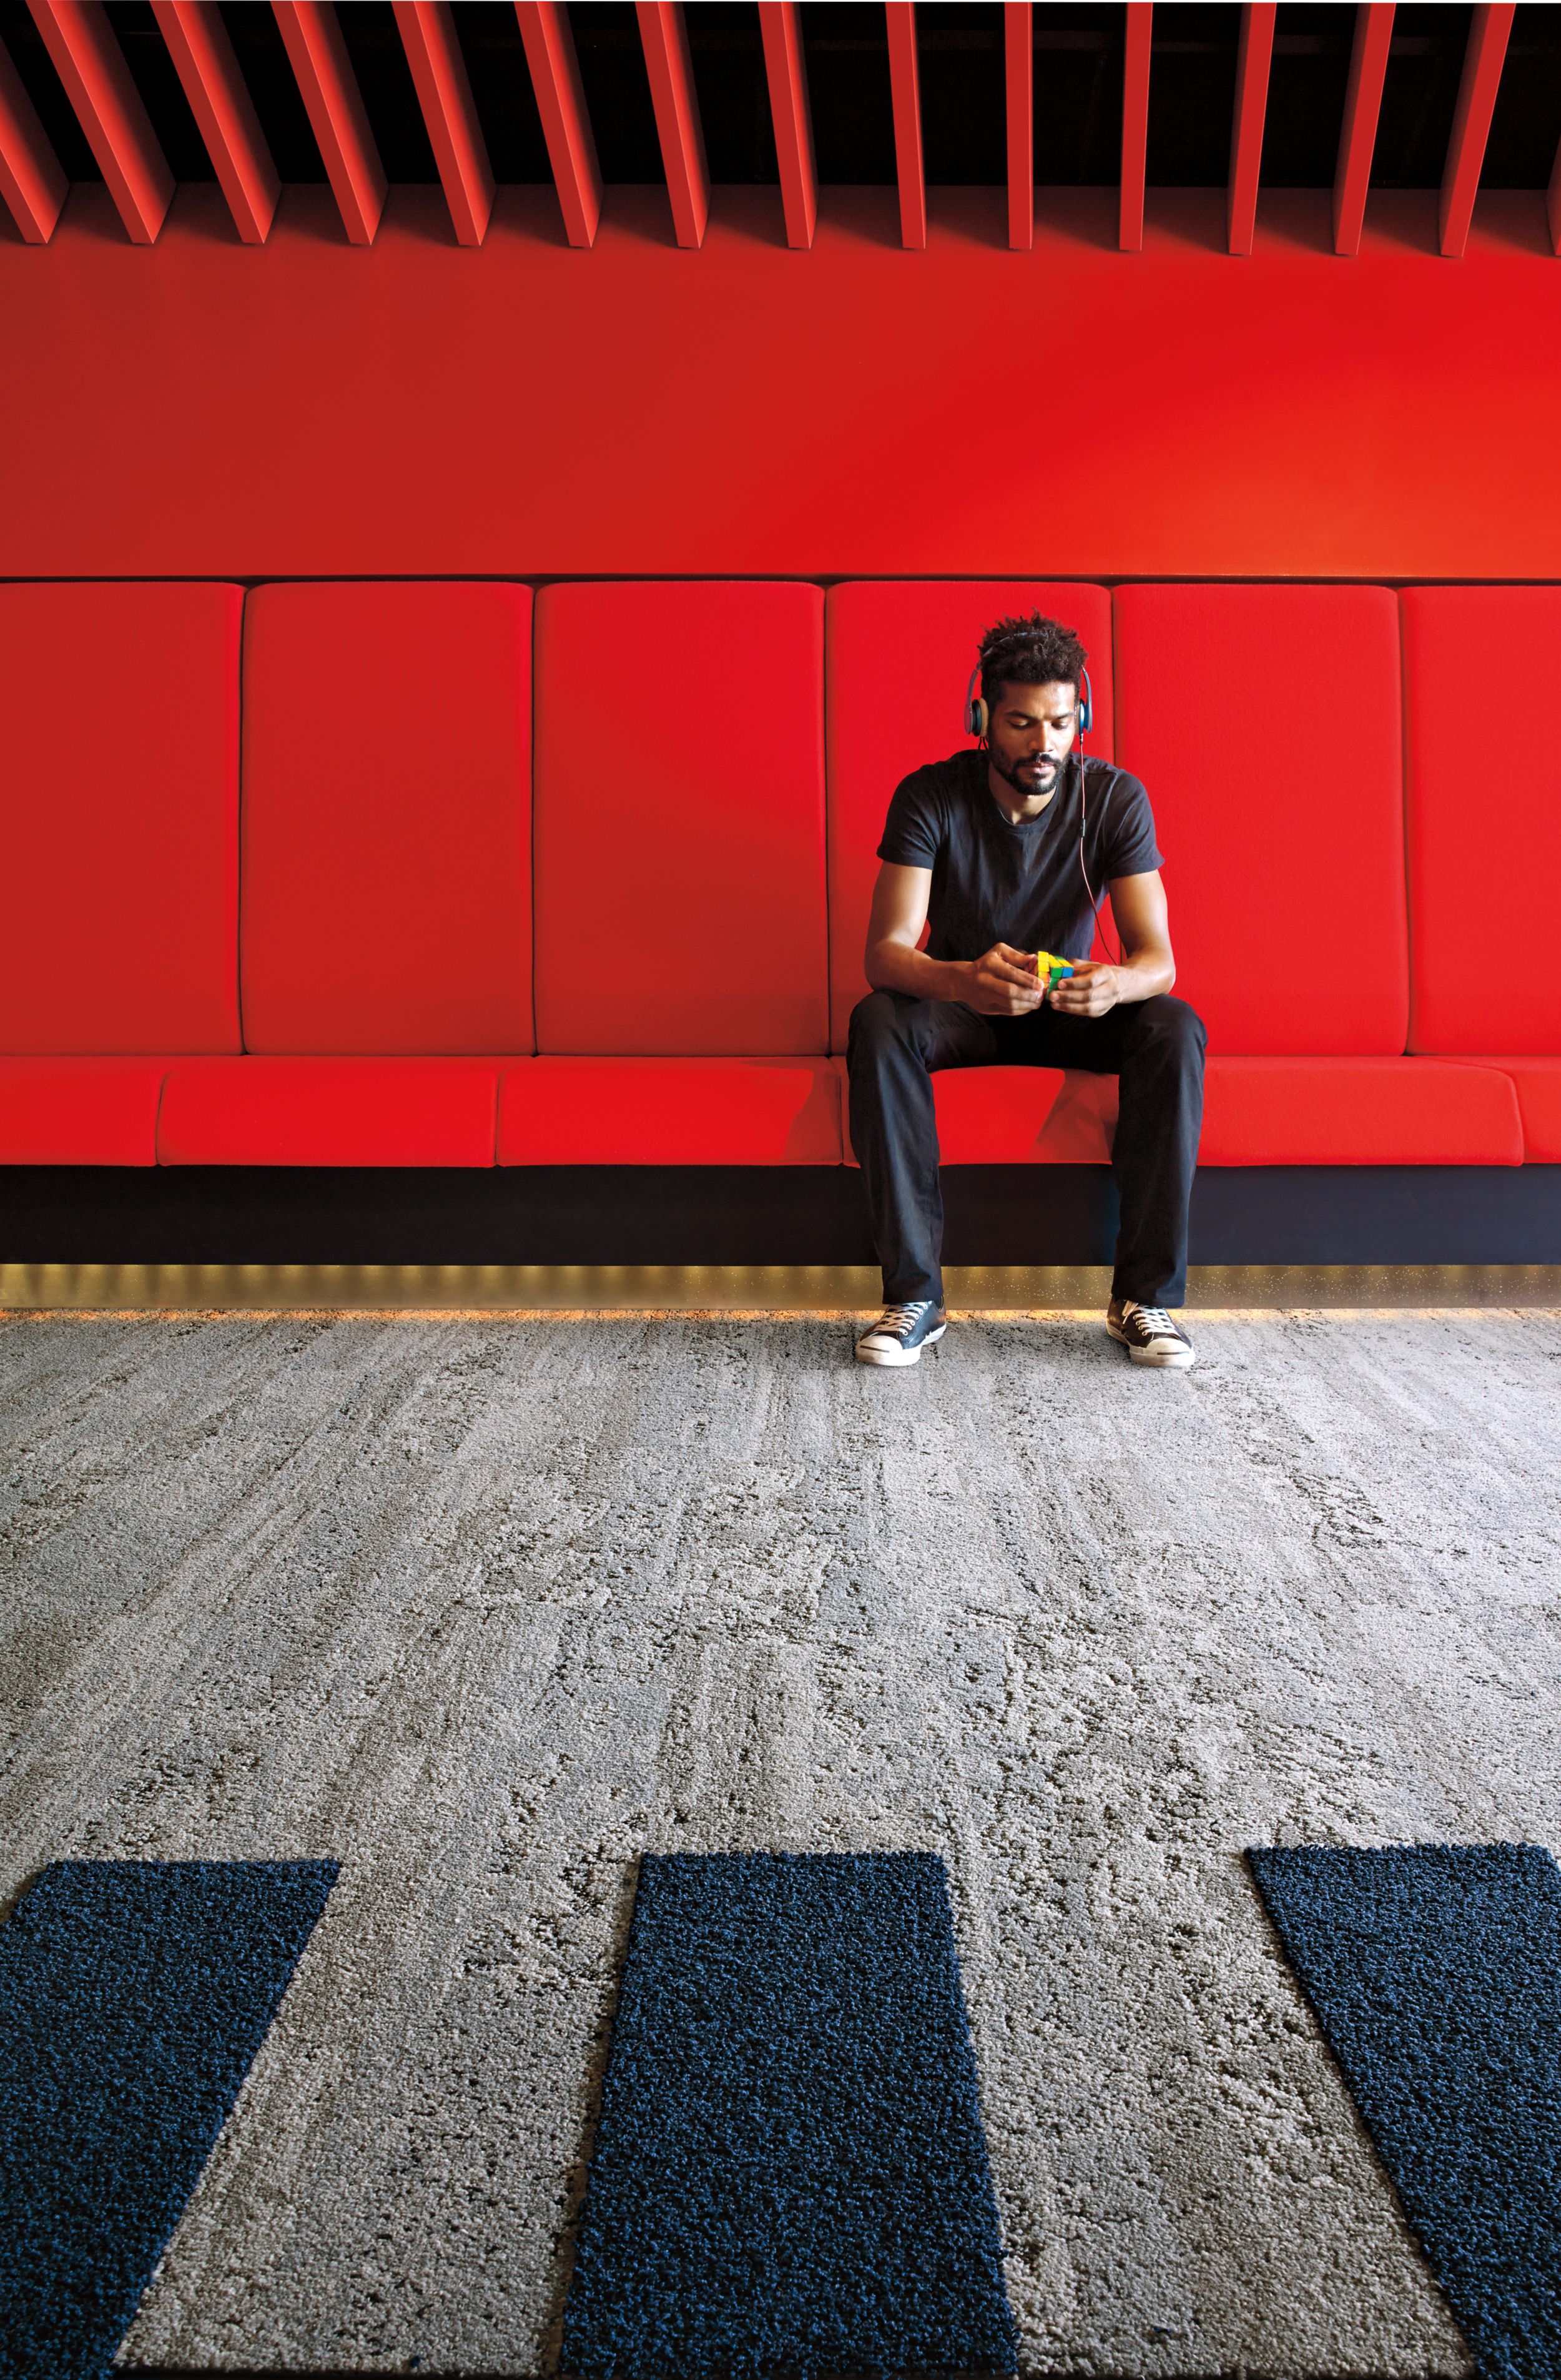 Interface HN810 plank carpet tile in waiting area with red bench and wall and man listening to music Bildnummer 3